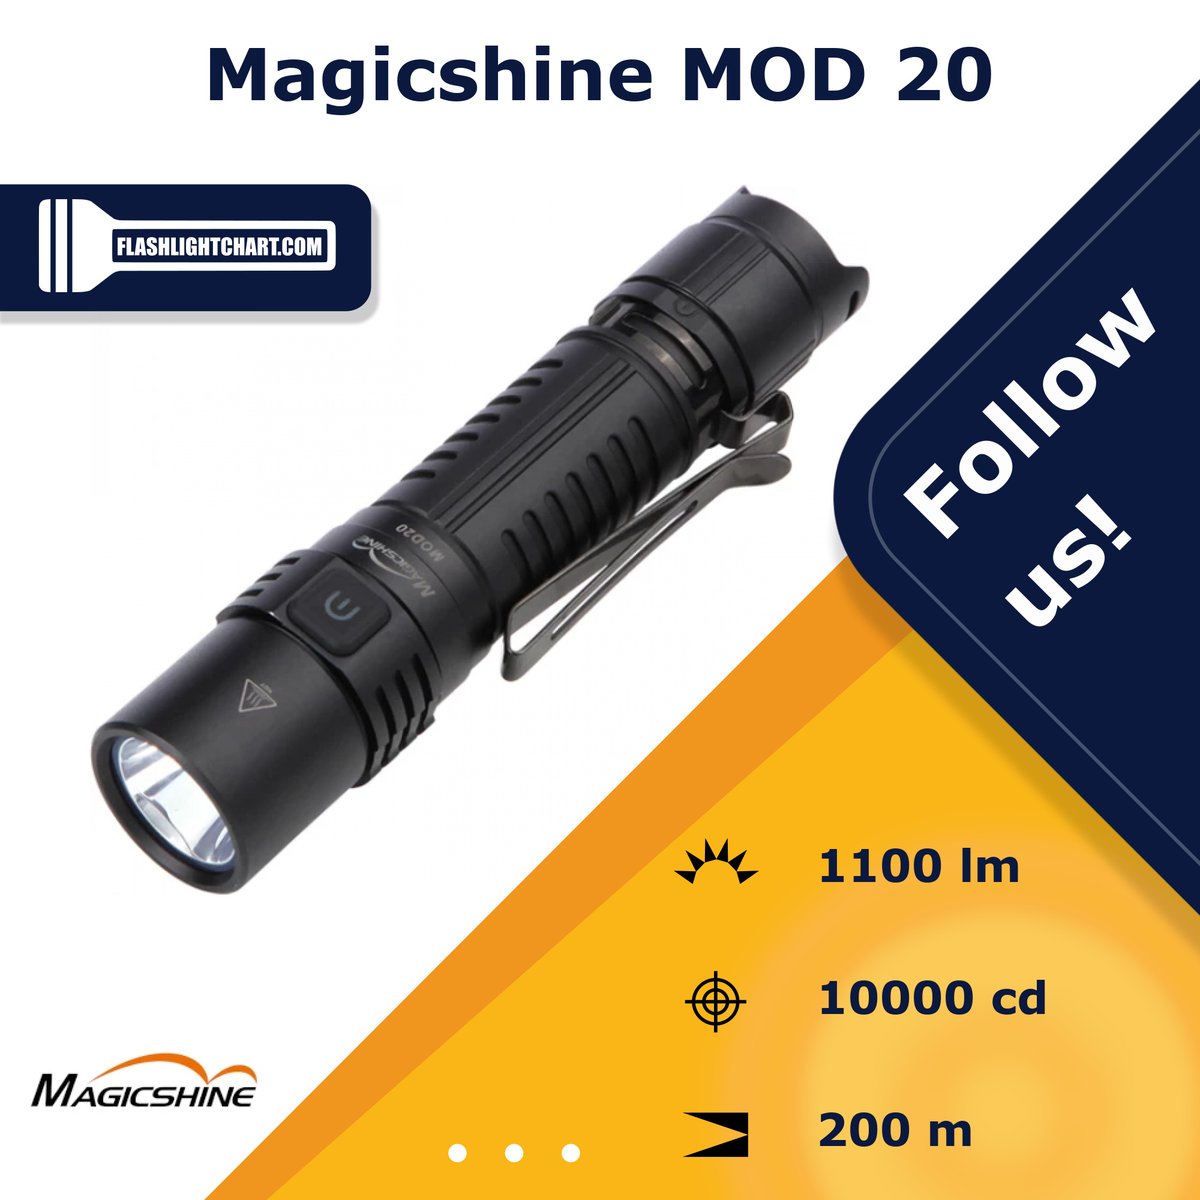 🔦 Magicshine MOD 20 Flashlight Review 🔦
🟢 Pros: waterproof, protective holster, ...
🔴 Cons: no auxiliary LEDs, ...
For more details, visit our website!
#FlashlightChart
#Magicshine #MagicshineFlashlight #MagicshineLight #Magicshine
#Flashlight 
flashlightchart.com/magicshine/mag…